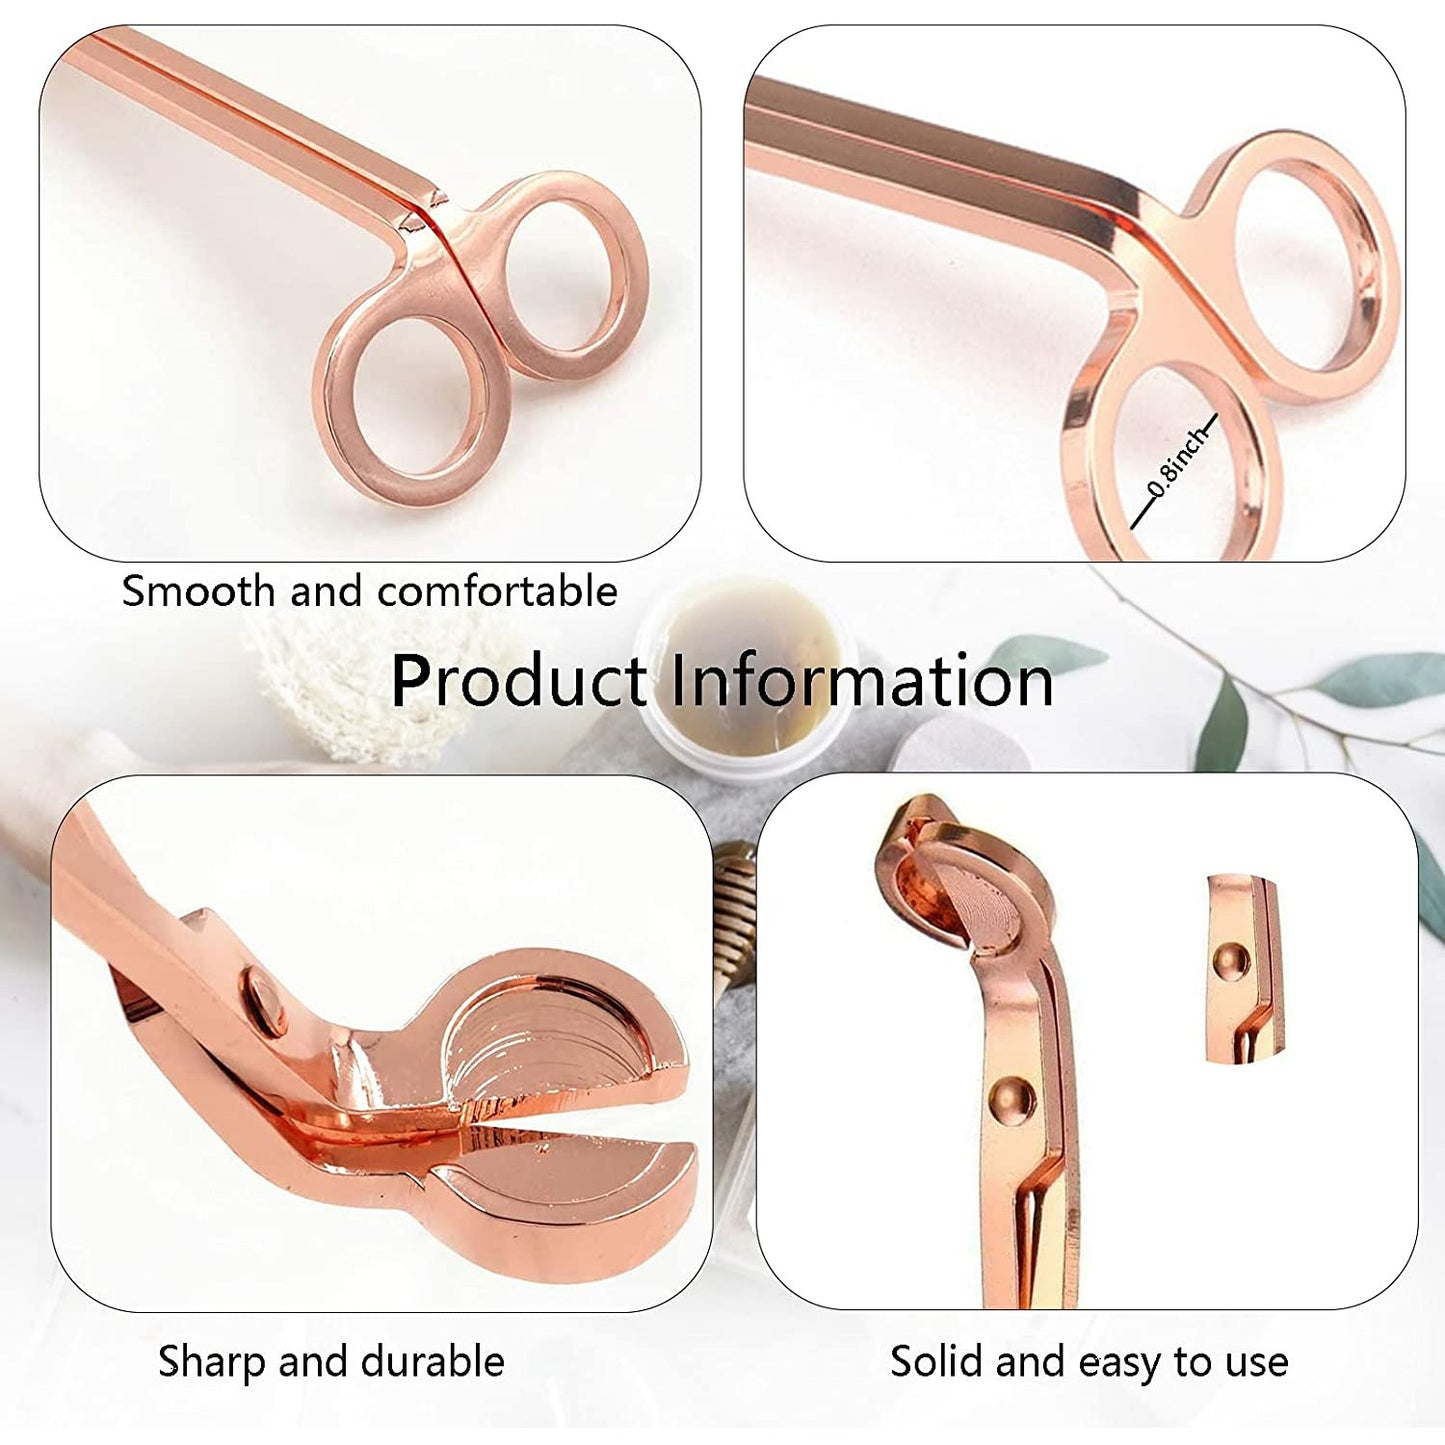 Rose Gold Candle Wick Trimmer - GlowAmaze